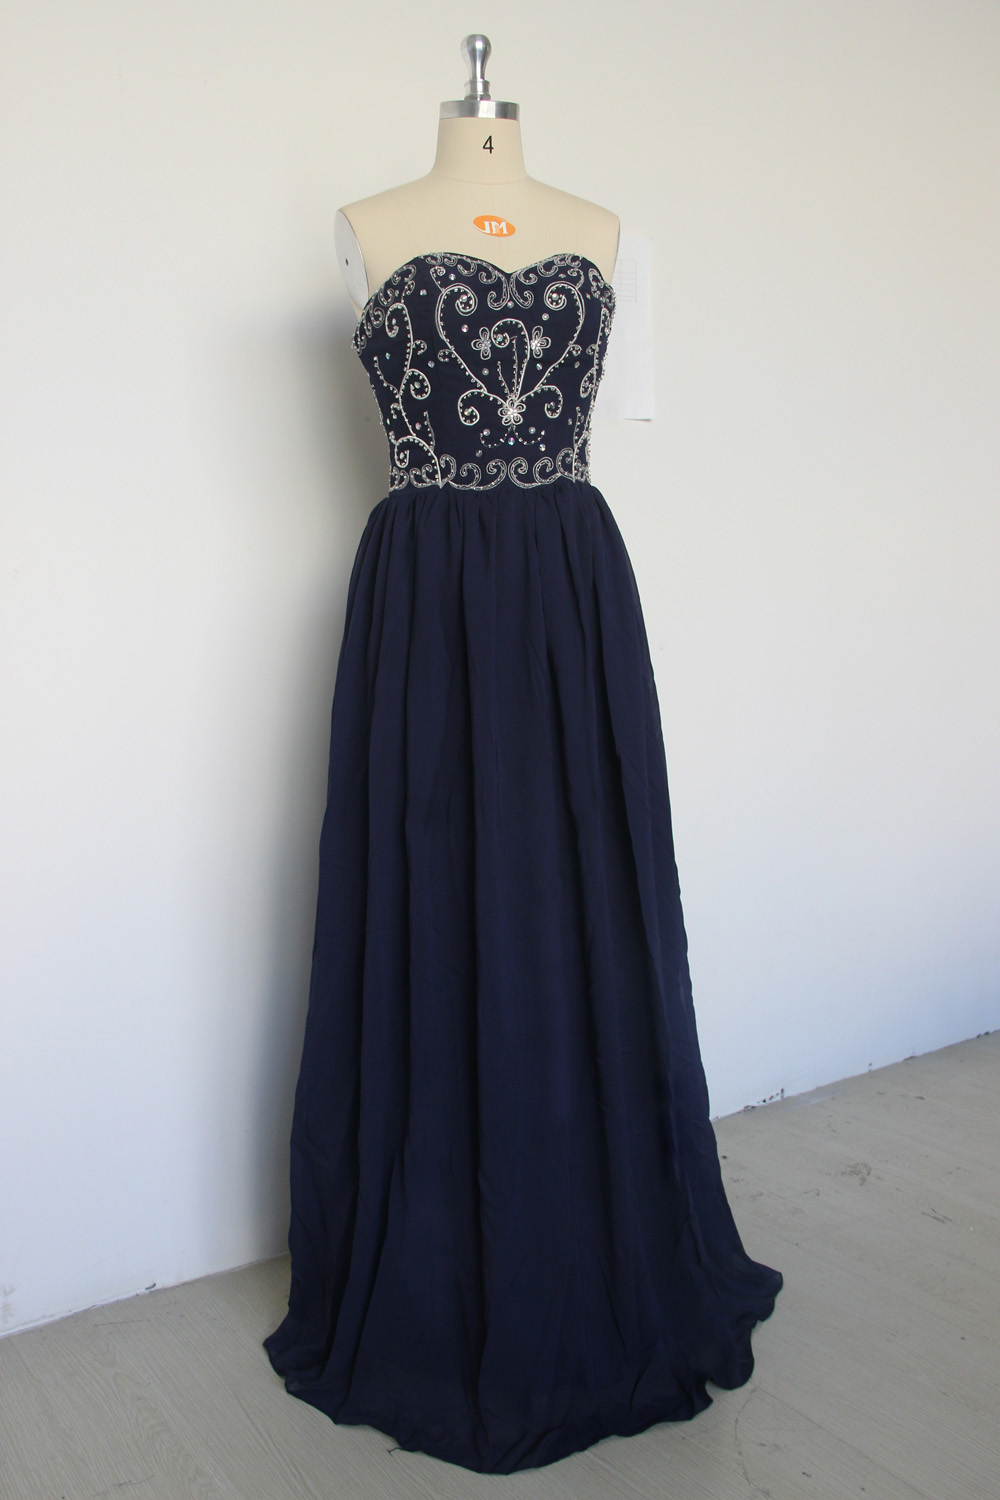 Exquisite Long Dark Navy Prom Gowns, Floor Length Sweetheart Chiffon Formal Dresses, Long Navy Blue Embroidery Bridesmaid Dresses